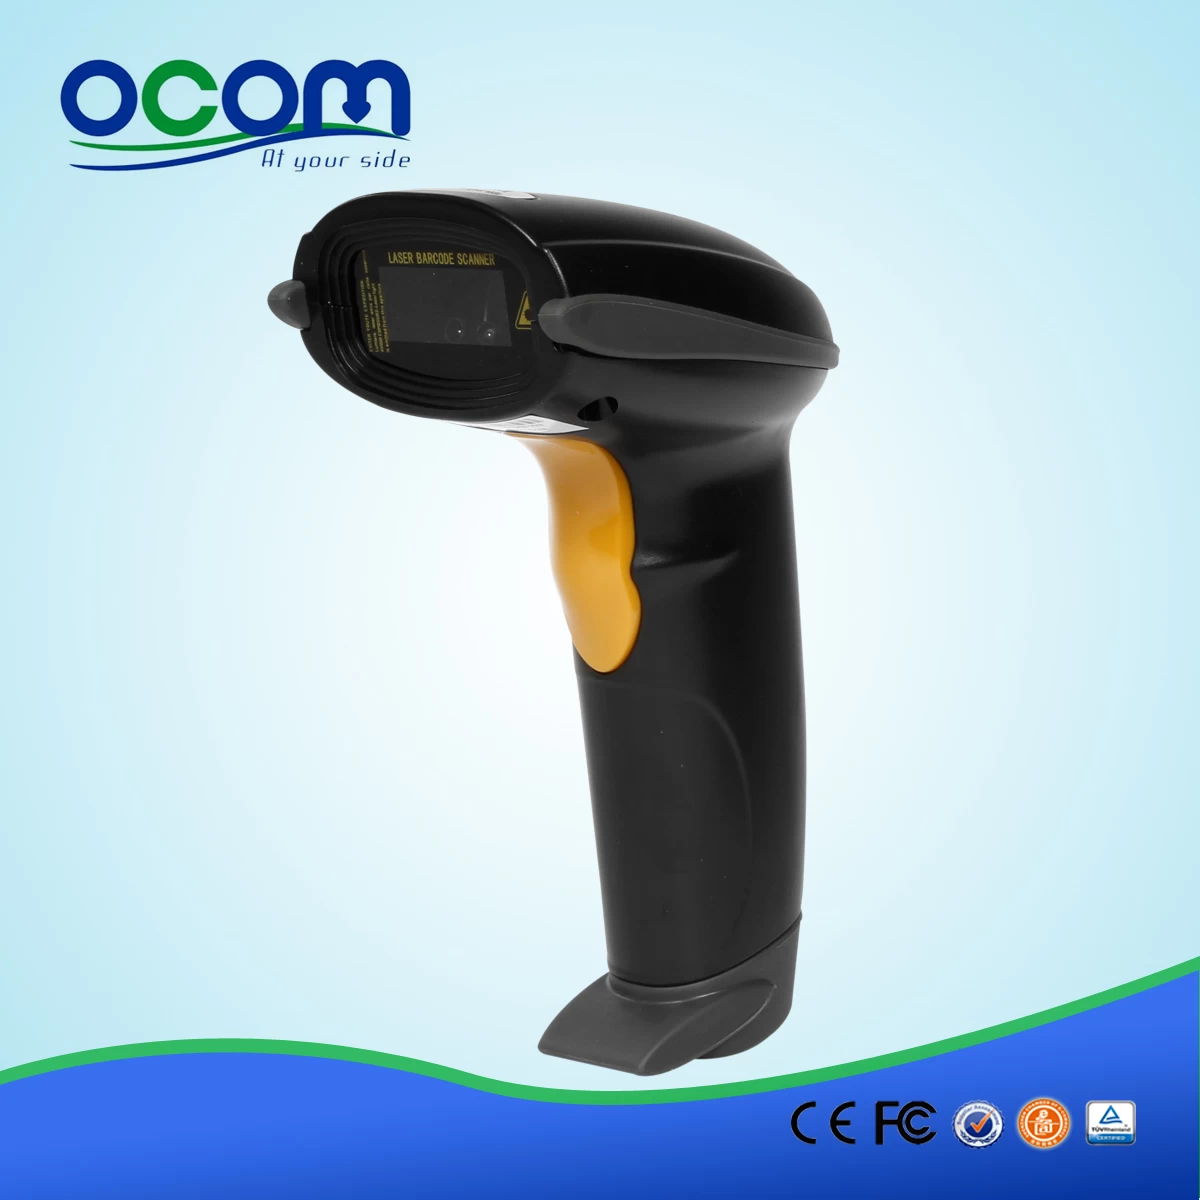 Android Compatible USB Barcode Reader Scanner